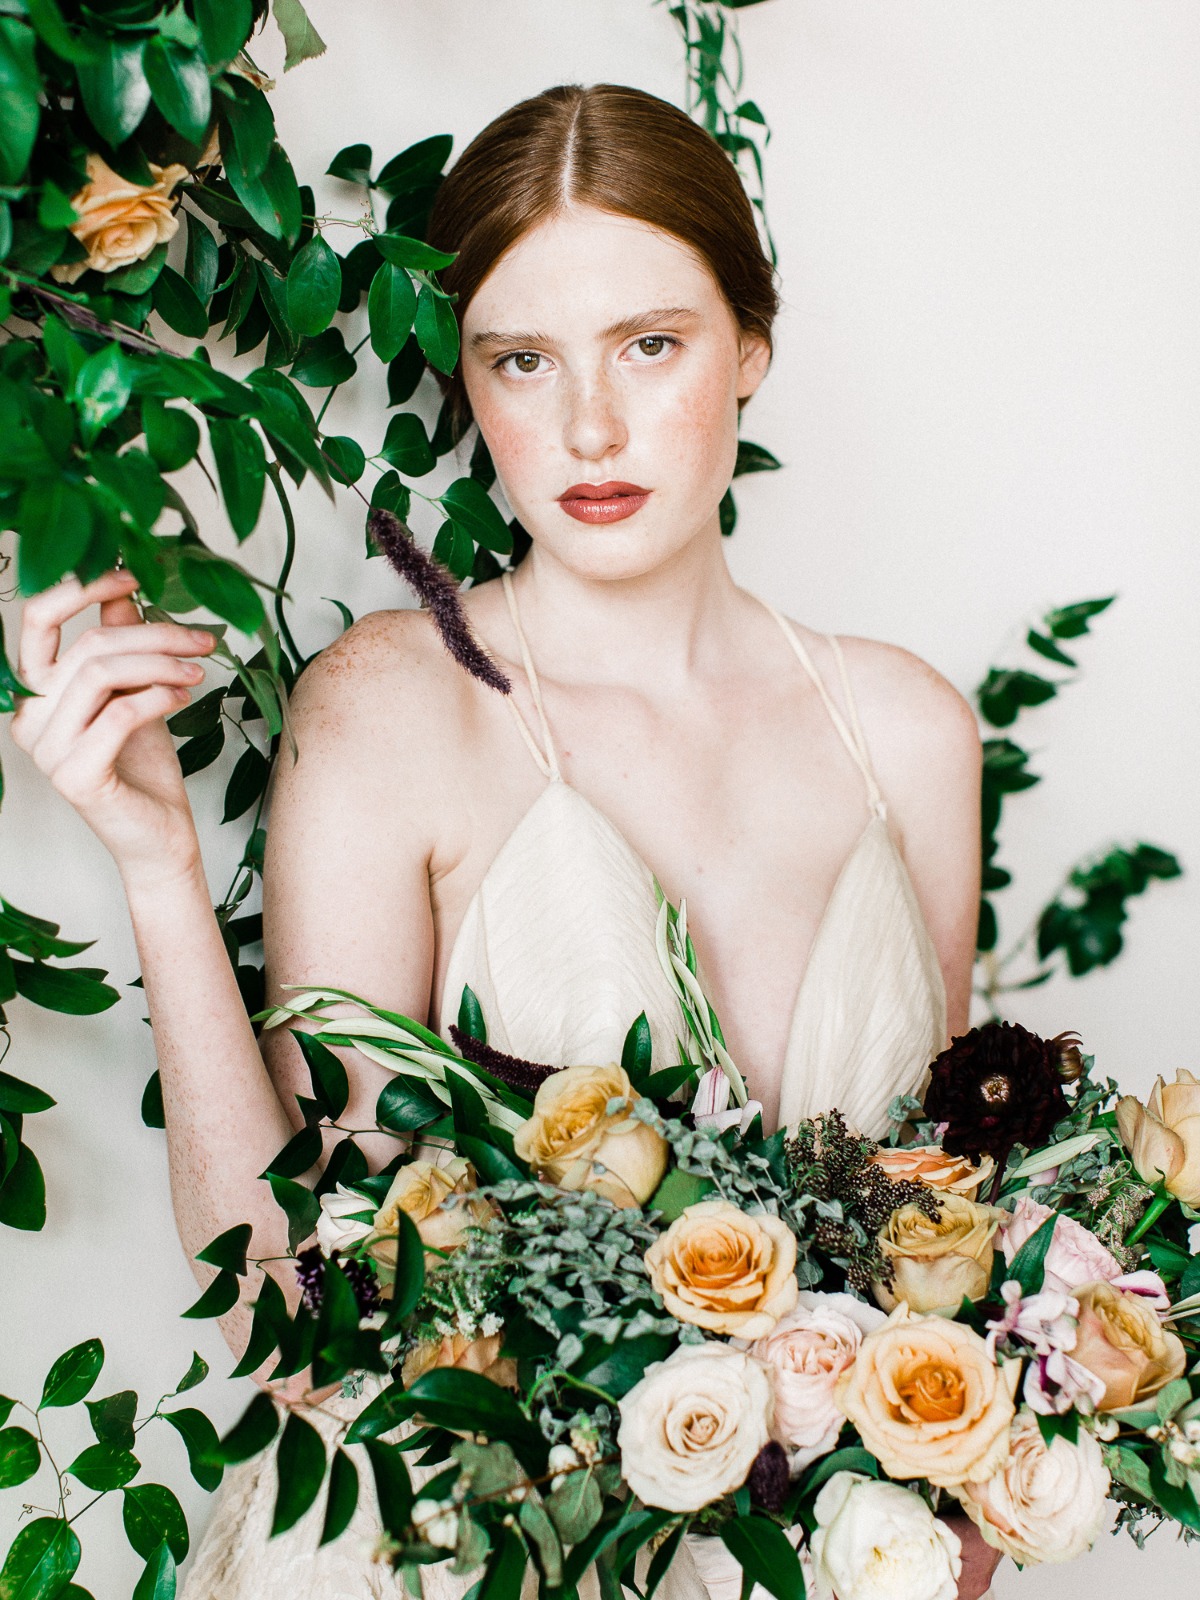 A Modern Ethereal Wedding Idea In White And Gold